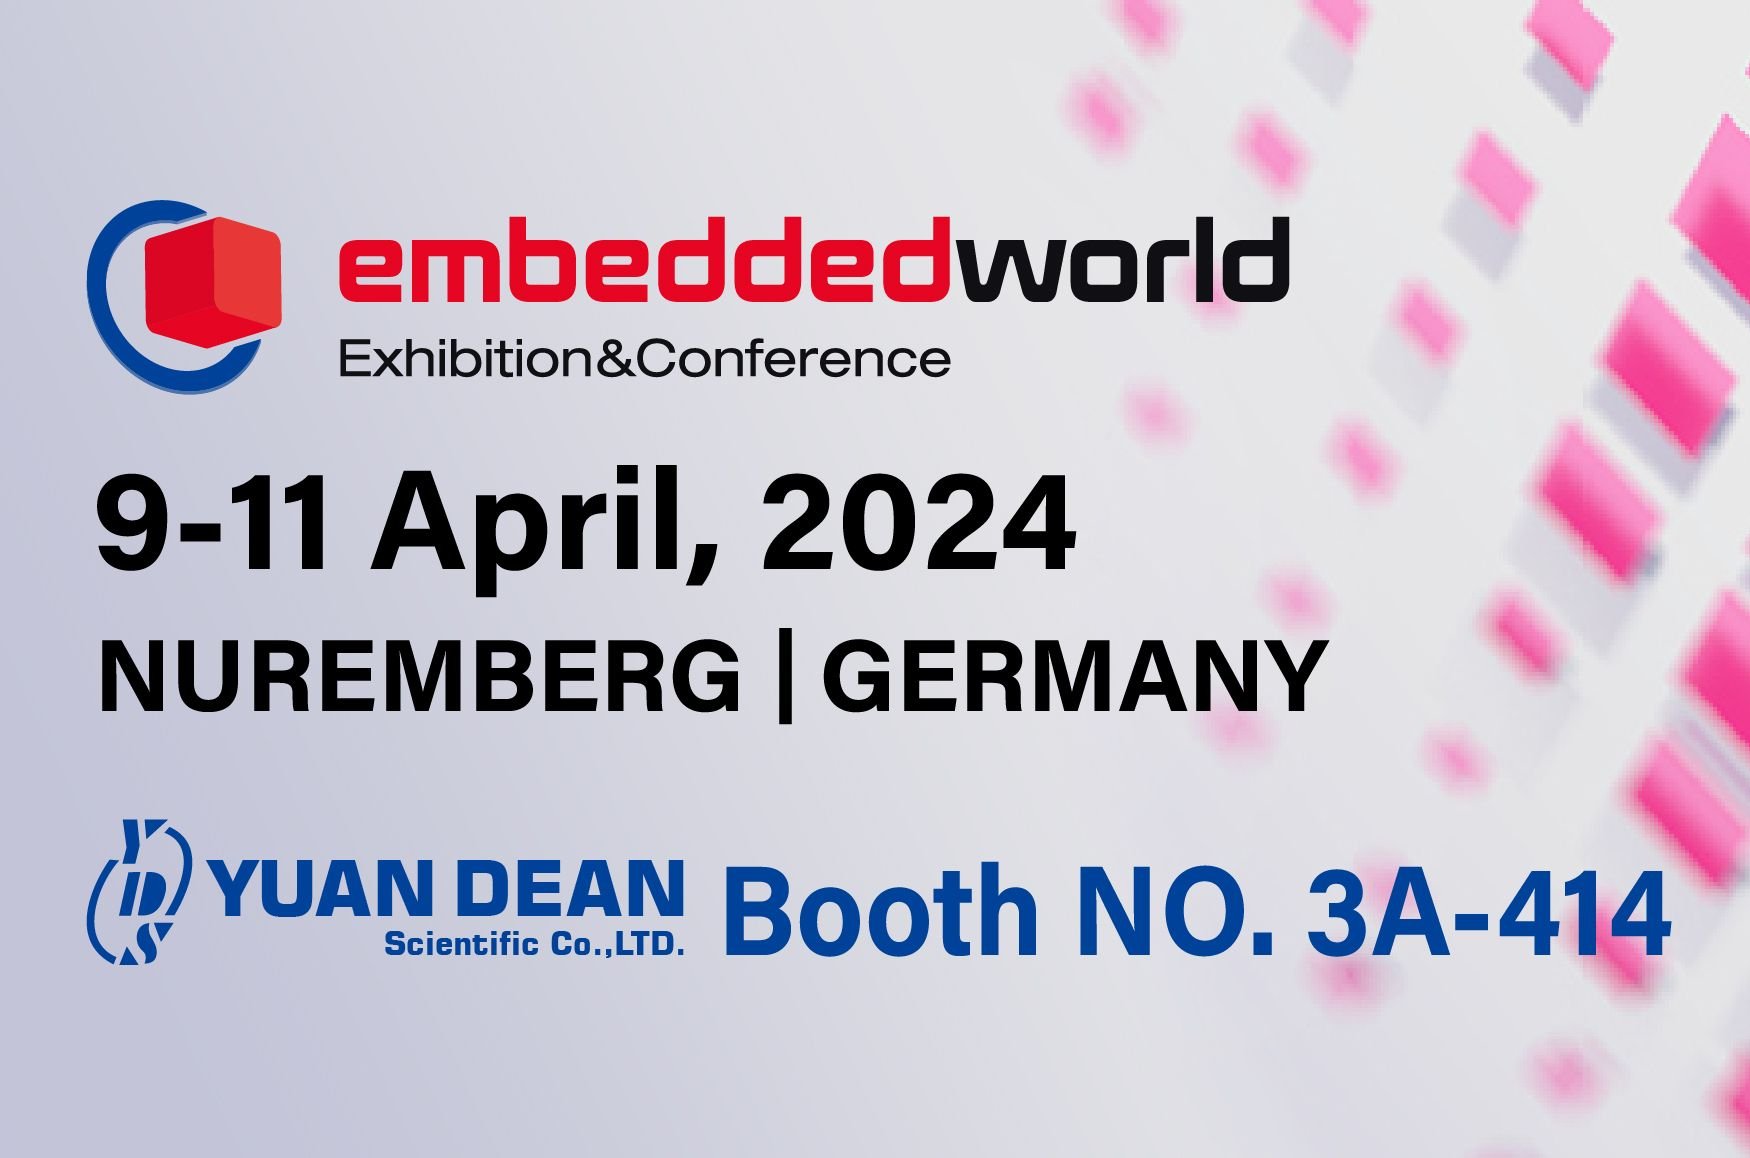 Join us at Hall 3A- 414 from Apr. 9-11, 2024 in Nuremberg, Germany